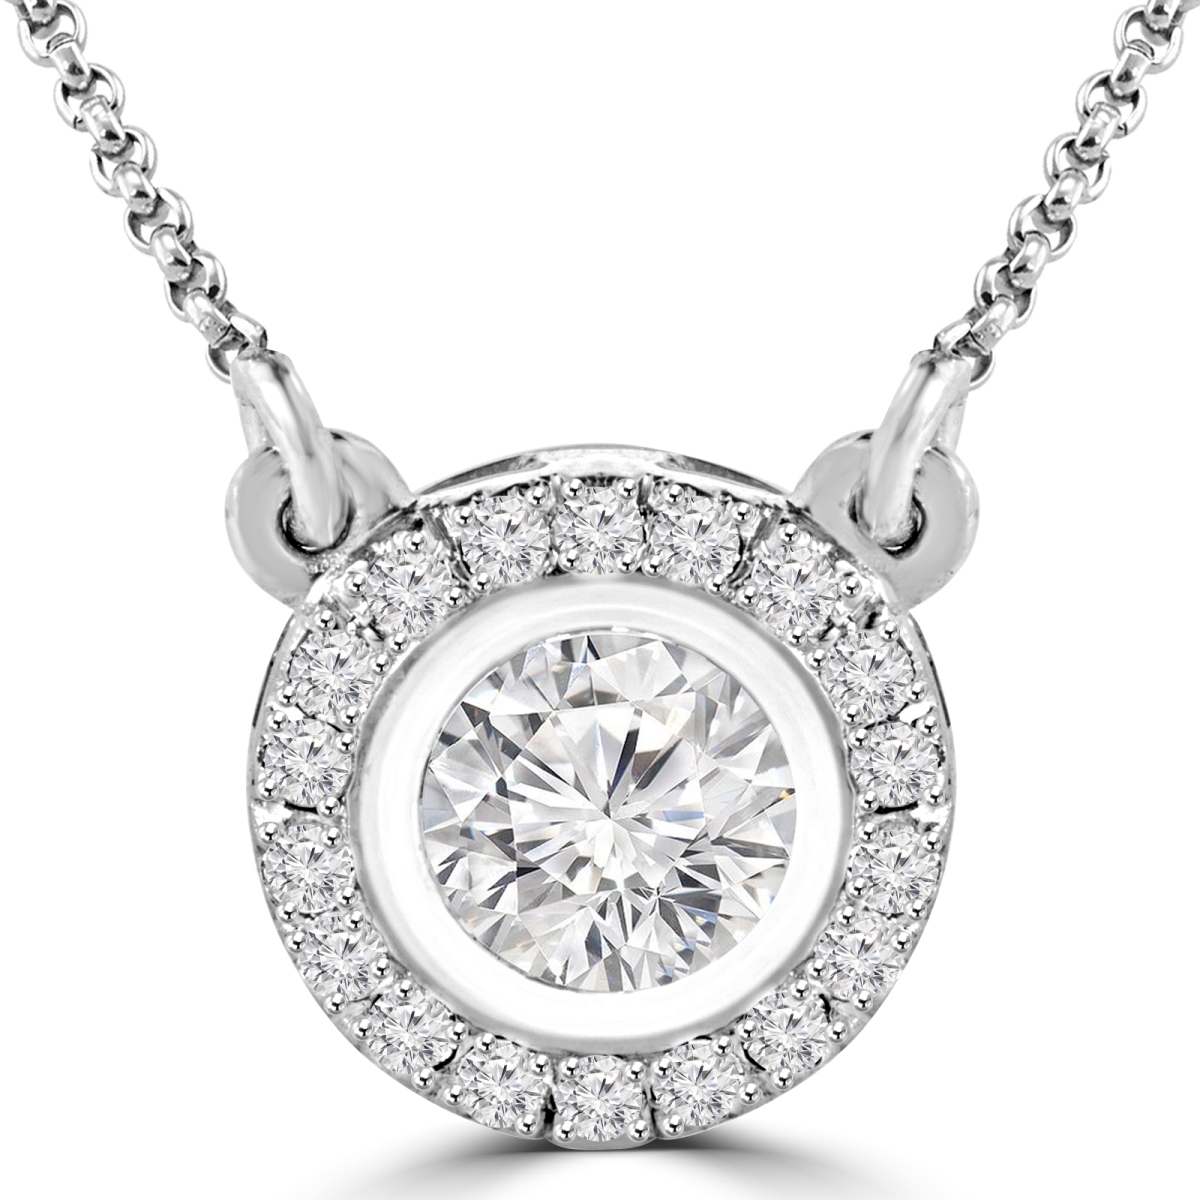 Great Gems 0.5 CTW Round Diamond Halo Solitaire with Accents Pendant Necklace in 14K - White - 4.4 x 2.7 mm